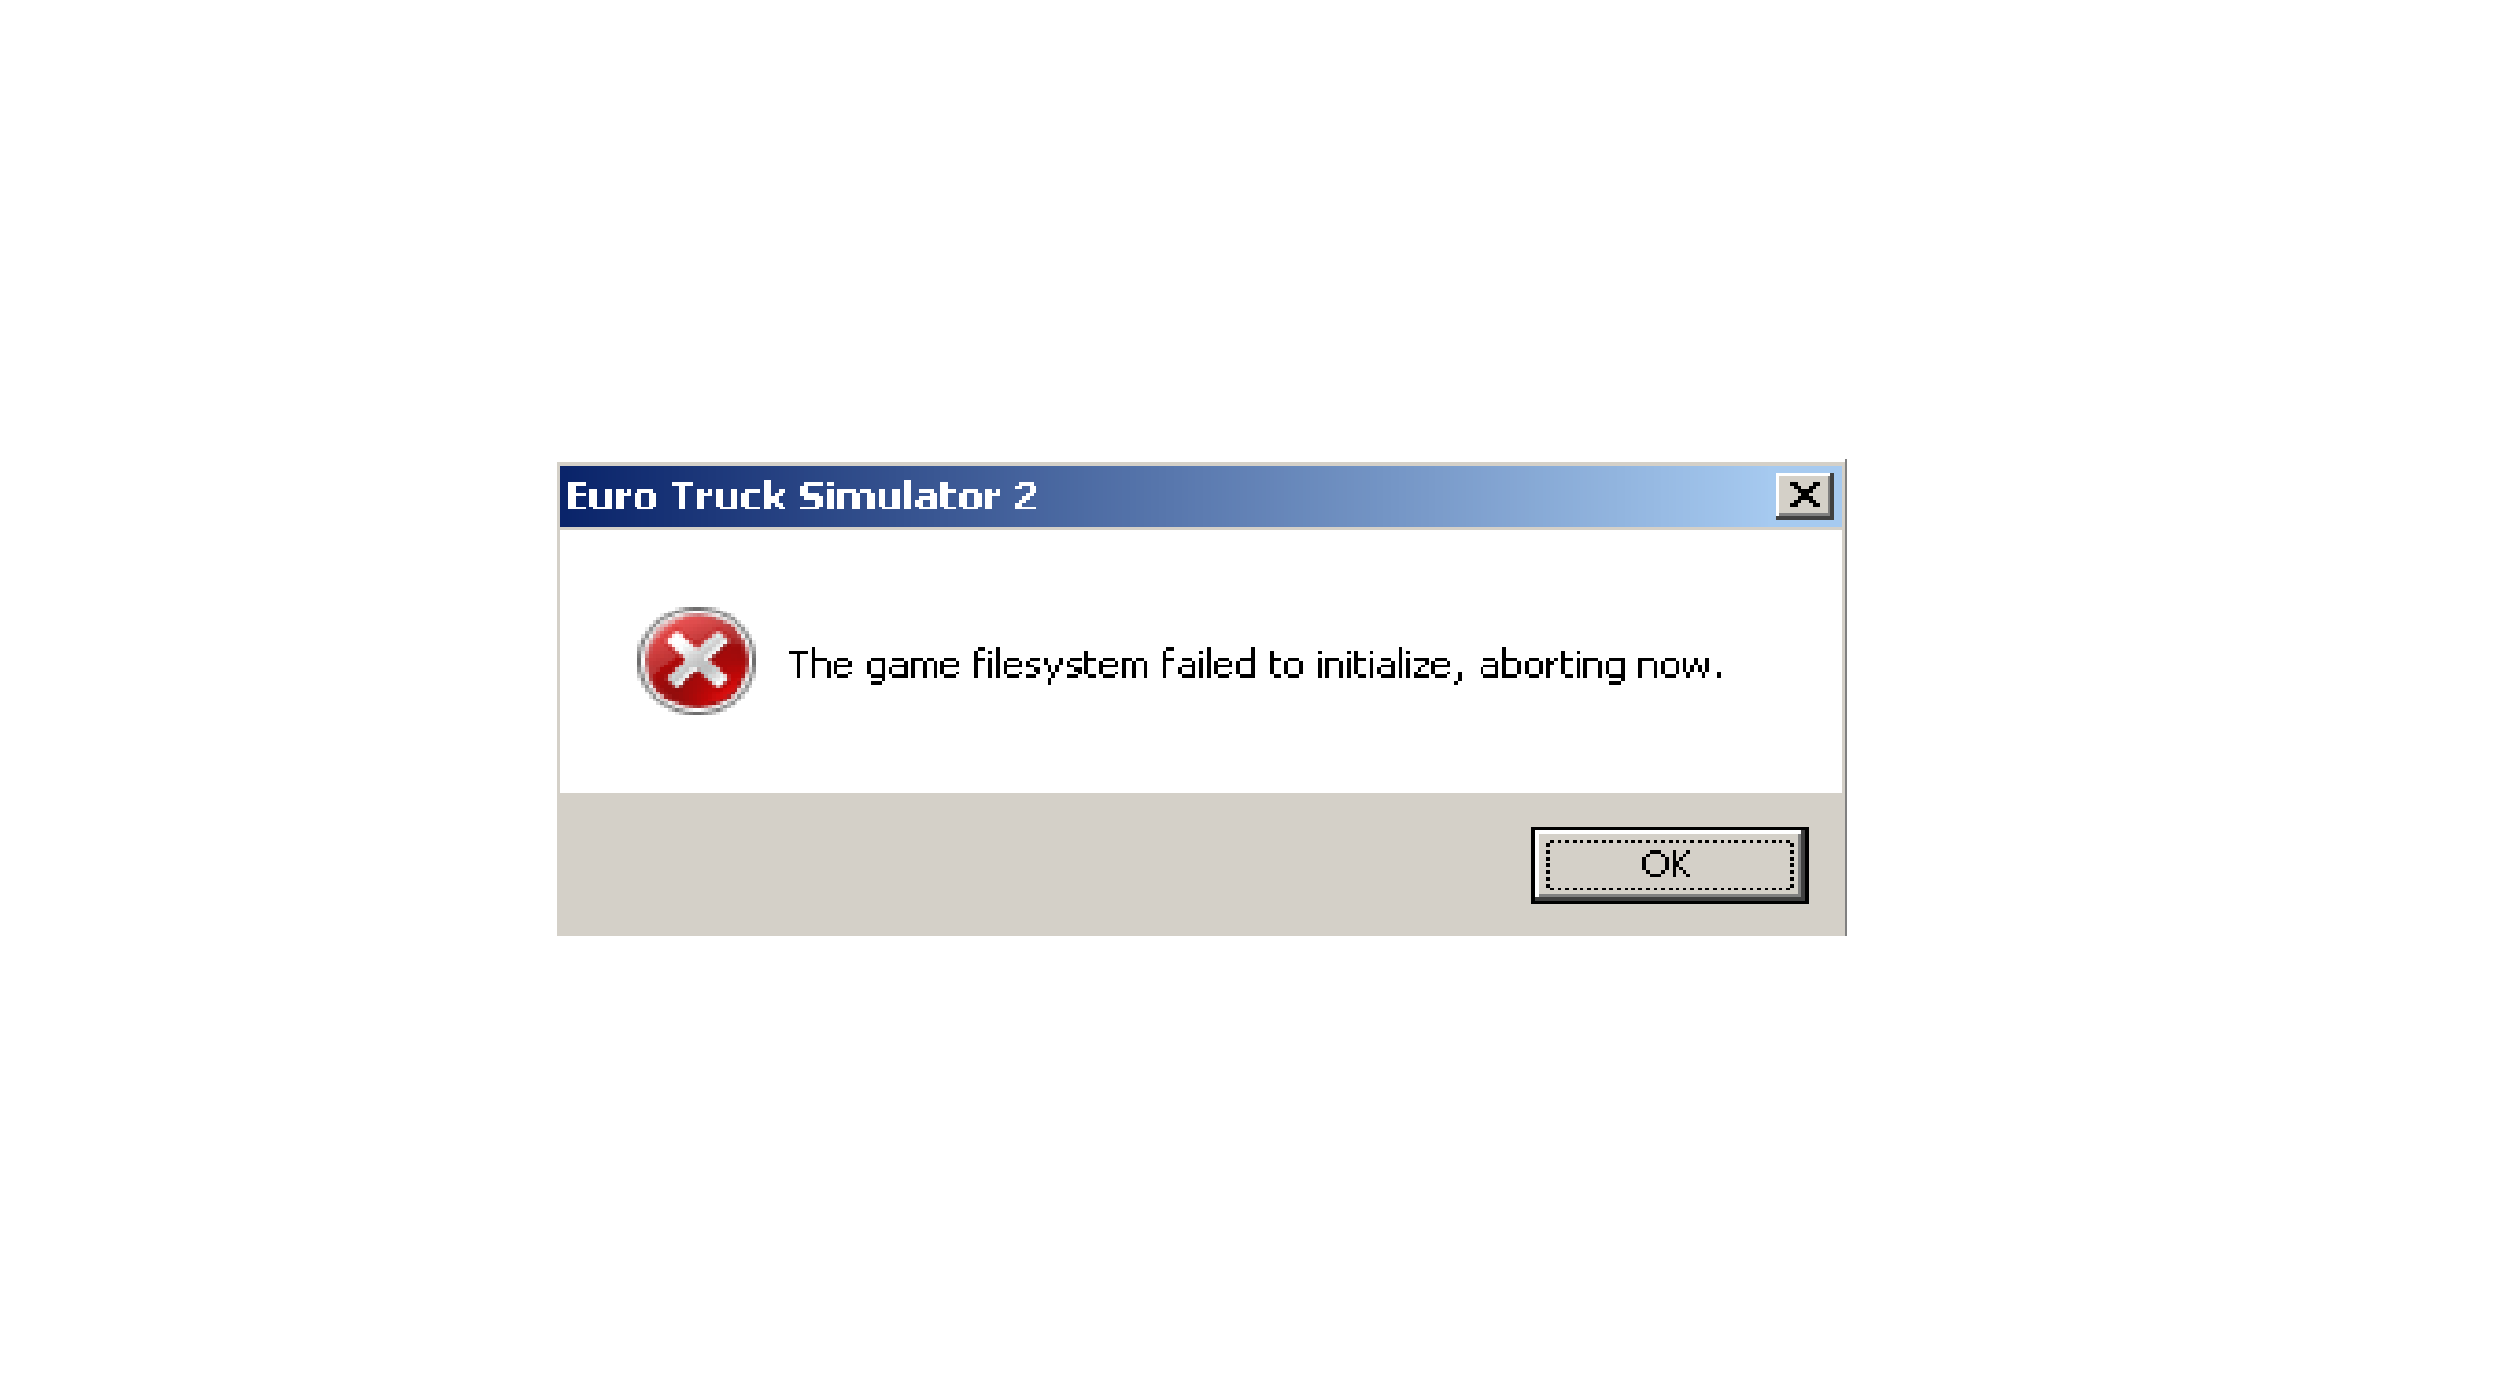 Failed to initialize renderer. The game filesystem failed to initialize aborting Now Euro Truck Simulator 2. The game filesystem failed to initialize aborting Now. The game filesystem failed to initialize aborting Now American Truck Simulator. Failure to initialize.